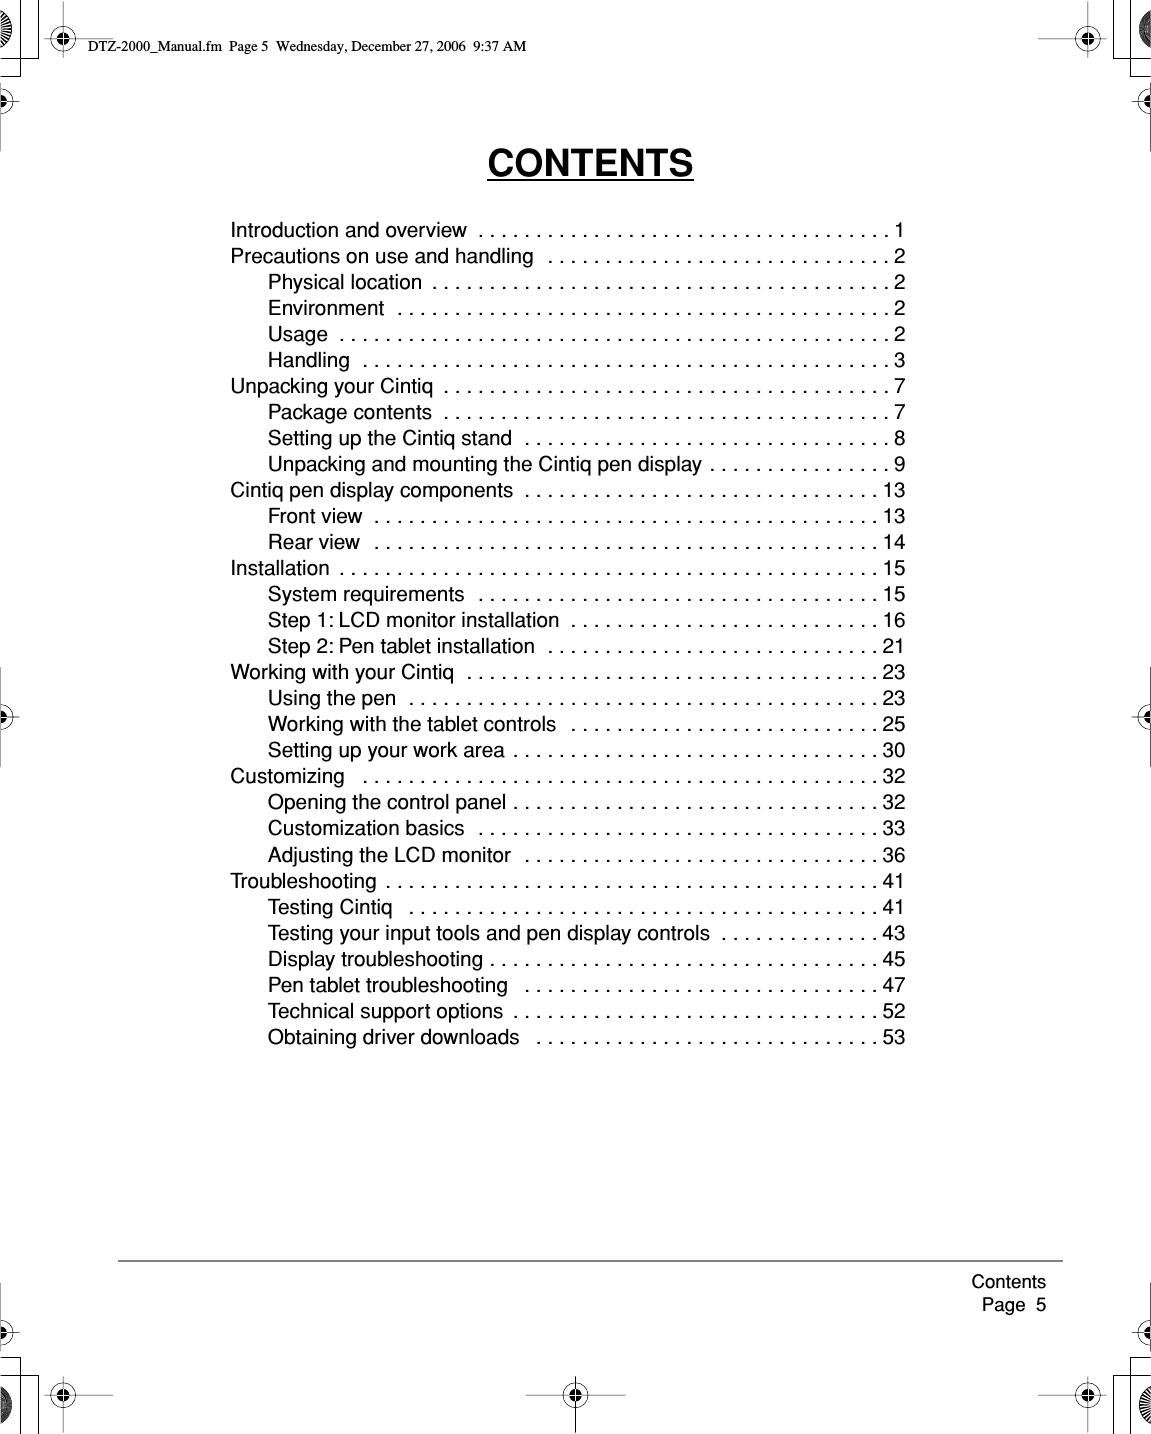  Contents     Page  5 CONTENTS Introduction and overview  . . . . . . . . . . . . . . . . . . . . . . . . . . . . . . . . . . . . 1Precautions on use and handling  . . . . . . . . . . . . . . . . . . . . . . . . . . . . . . 2Physical location  . . . . . . . . . . . . . . . . . . . . . . . . . . . . . . . . . . . . . . . . 2Environment  . . . . . . . . . . . . . . . . . . . . . . . . . . . . . . . . . . . . . . . . . . . 2Usage  . . . . . . . . . . . . . . . . . . . . . . . . . . . . . . . . . . . . . . . . . . . . . . . . 2Handling  . . . . . . . . . . . . . . . . . . . . . . . . . . . . . . . . . . . . . . . . . . . . . . 3Unpacking your Cintiq  . . . . . . . . . . . . . . . . . . . . . . . . . . . . . . . . . . . . . . . 7Package contents  . . . . . . . . . . . . . . . . . . . . . . . . . . . . . . . . . . . . . . . 7Setting up the Cintiq stand  . . . . . . . . . . . . . . . . . . . . . . . . . . . . . . . . 8Unpacking and mounting the Cintiq pen display . . . . . . . . . . . . . . . . 9Cintiq pen display components  . . . . . . . . . . . . . . . . . . . . . . . . . . . . . . . 13Front view  . . . . . . . . . . . . . . . . . . . . . . . . . . . . . . . . . . . . . . . . . . . . 13Rear view  . . . . . . . . . . . . . . . . . . . . . . . . . . . . . . . . . . . . . . . . . . . . 14Installation  . . . . . . . . . . . . . . . . . . . . . . . . . . . . . . . . . . . . . . . . . . . . . . . 15System requirements  . . . . . . . . . . . . . . . . . . . . . . . . . . . . . . . . . . . 15Step 1: LCD monitor installation  . . . . . . . . . . . . . . . . . . . . . . . . . . . 16Step 2: Pen tablet installation  . . . . . . . . . . . . . . . . . . . . . . . . . . . . . 21Working with your Cintiq  . . . . . . . . . . . . . . . . . . . . . . . . . . . . . . . . . . . . 23Using the pen  . . . . . . . . . . . . . . . . . . . . . . . . . . . . . . . . . . . . . . . . . 23Working with the tablet controls   . . . . . . . . . . . . . . . . . . . . . . . . . . . 25Setting up your work area  . . . . . . . . . . . . . . . . . . . . . . . . . . . . . . . . 30Customizing   . . . . . . . . . . . . . . . . . . . . . . . . . . . . . . . . . . . . . . . . . . . . . 32Opening the control panel . . . . . . . . . . . . . . . . . . . . . . . . . . . . . . . . 32Customization basics  . . . . . . . . . . . . . . . . . . . . . . . . . . . . . . . . . . . 33Adjusting the LCD monitor  . . . . . . . . . . . . . . . . . . . . . . . . . . . . . . . 36Troubleshooting  . . . . . . . . . . . . . . . . . . . . . . . . . . . . . . . . . . . . . . . . . . . 41Testing Cintiq   . . . . . . . . . . . . . . . . . . . . . . . . . . . . . . . . . . . . . . . . . 41Testing your input tools and pen display controls  . . . . . . . . . . . . . . 43Display troubleshooting . . . . . . . . . . . . . . . . . . . . . . . . . . . . . . . . . . 45Pen tablet troubleshooting   . . . . . . . . . . . . . . . . . . . . . . . . . . . . . . . 47Technical support options  . . . . . . . . . . . . . . . . . . . . . . . . . . . . . . . . 52Obtaining driver downloads   . . . . . . . . . . . . . . . . . . . . . . . . . . . . . . 53 DTZ-2000_Manual.fm  Page 5  Wednesday, December 27, 2006  9:37 AM